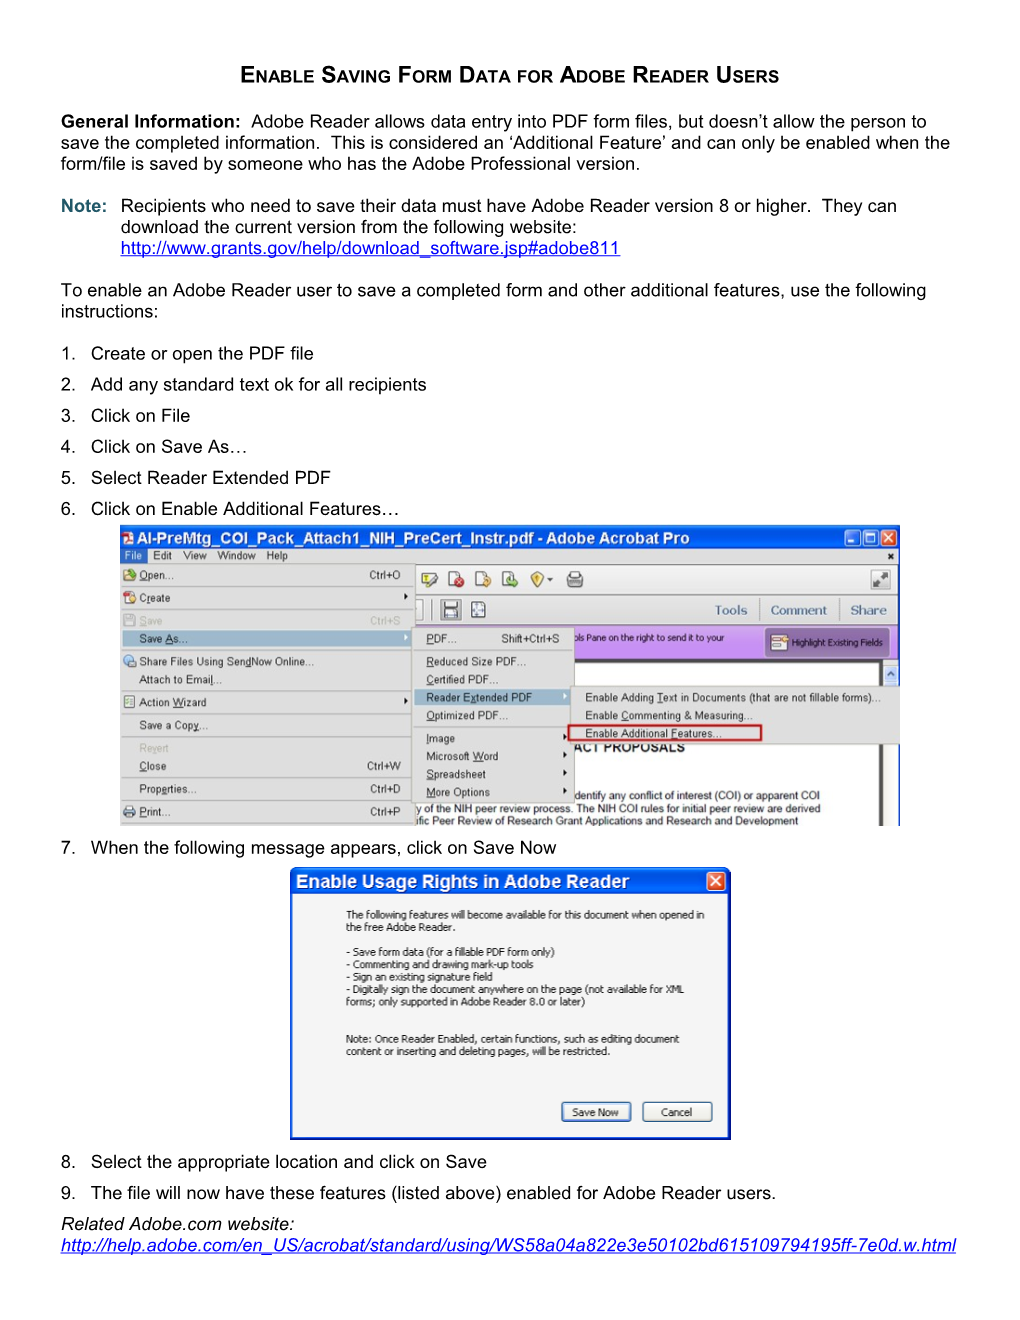 Enable Saving Form Data for Adobe Reader Users